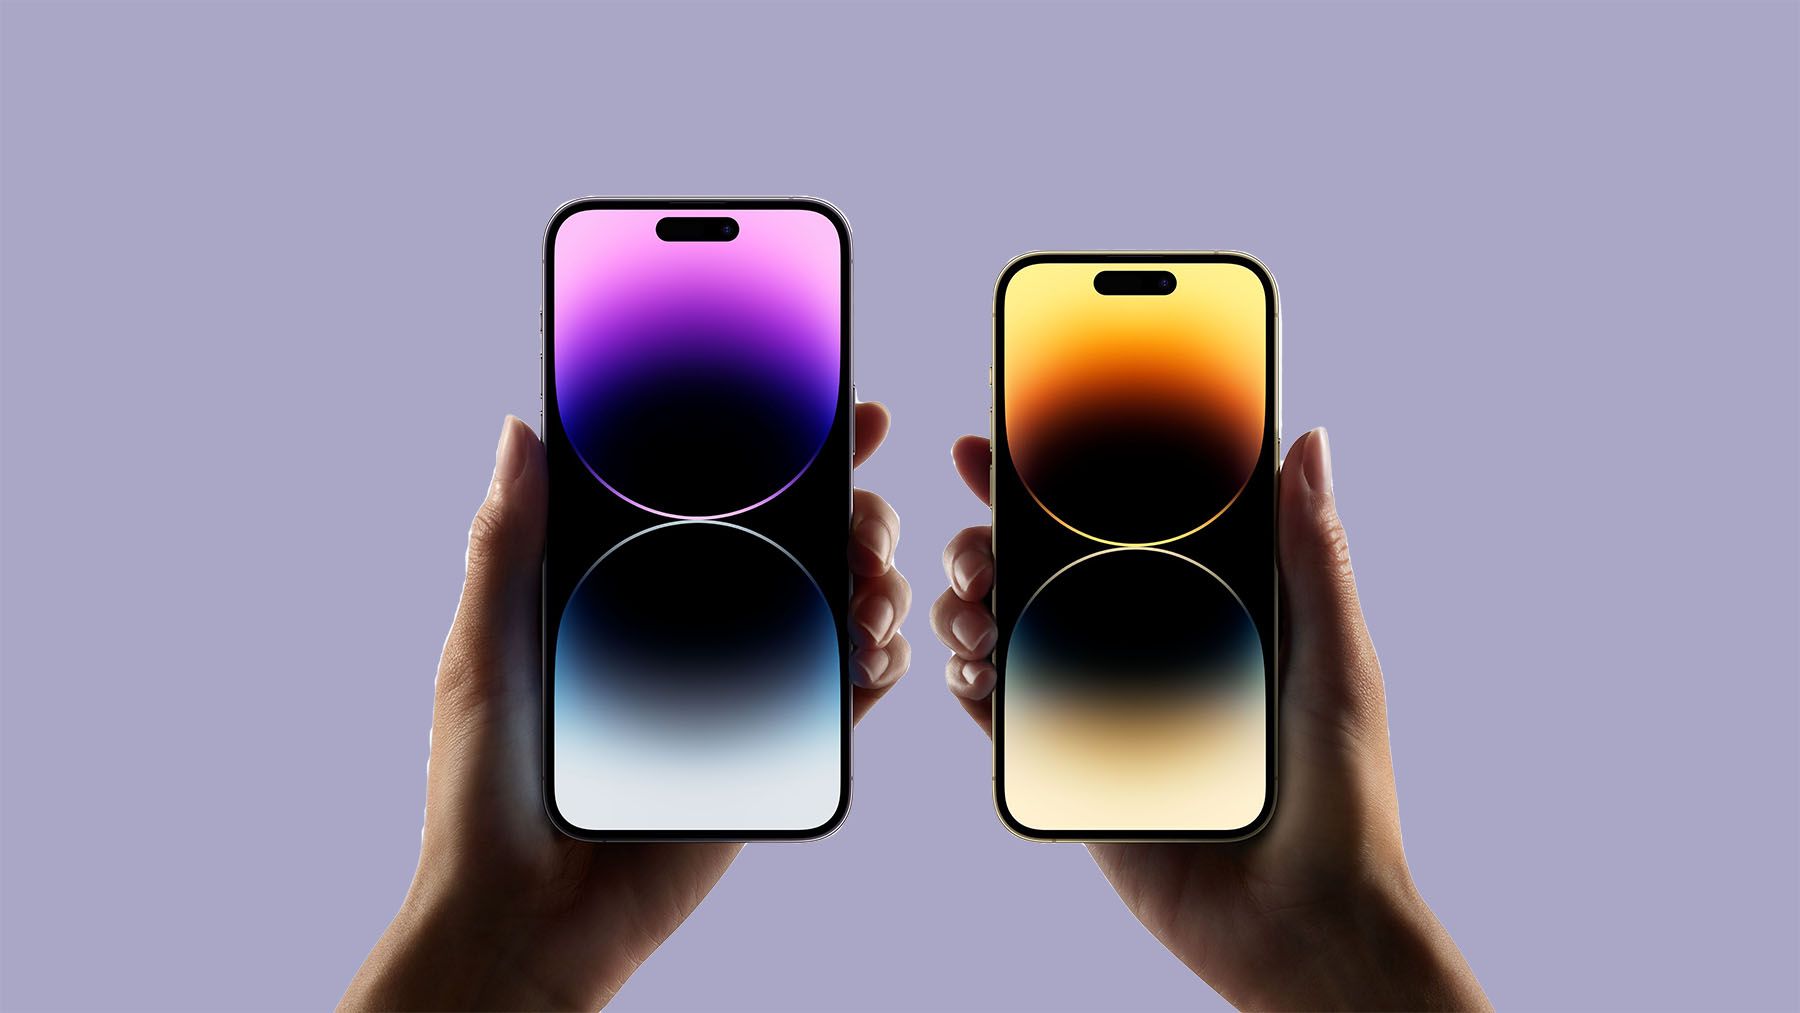 A person holds two smartphones with illuminated screens in front of a purple background